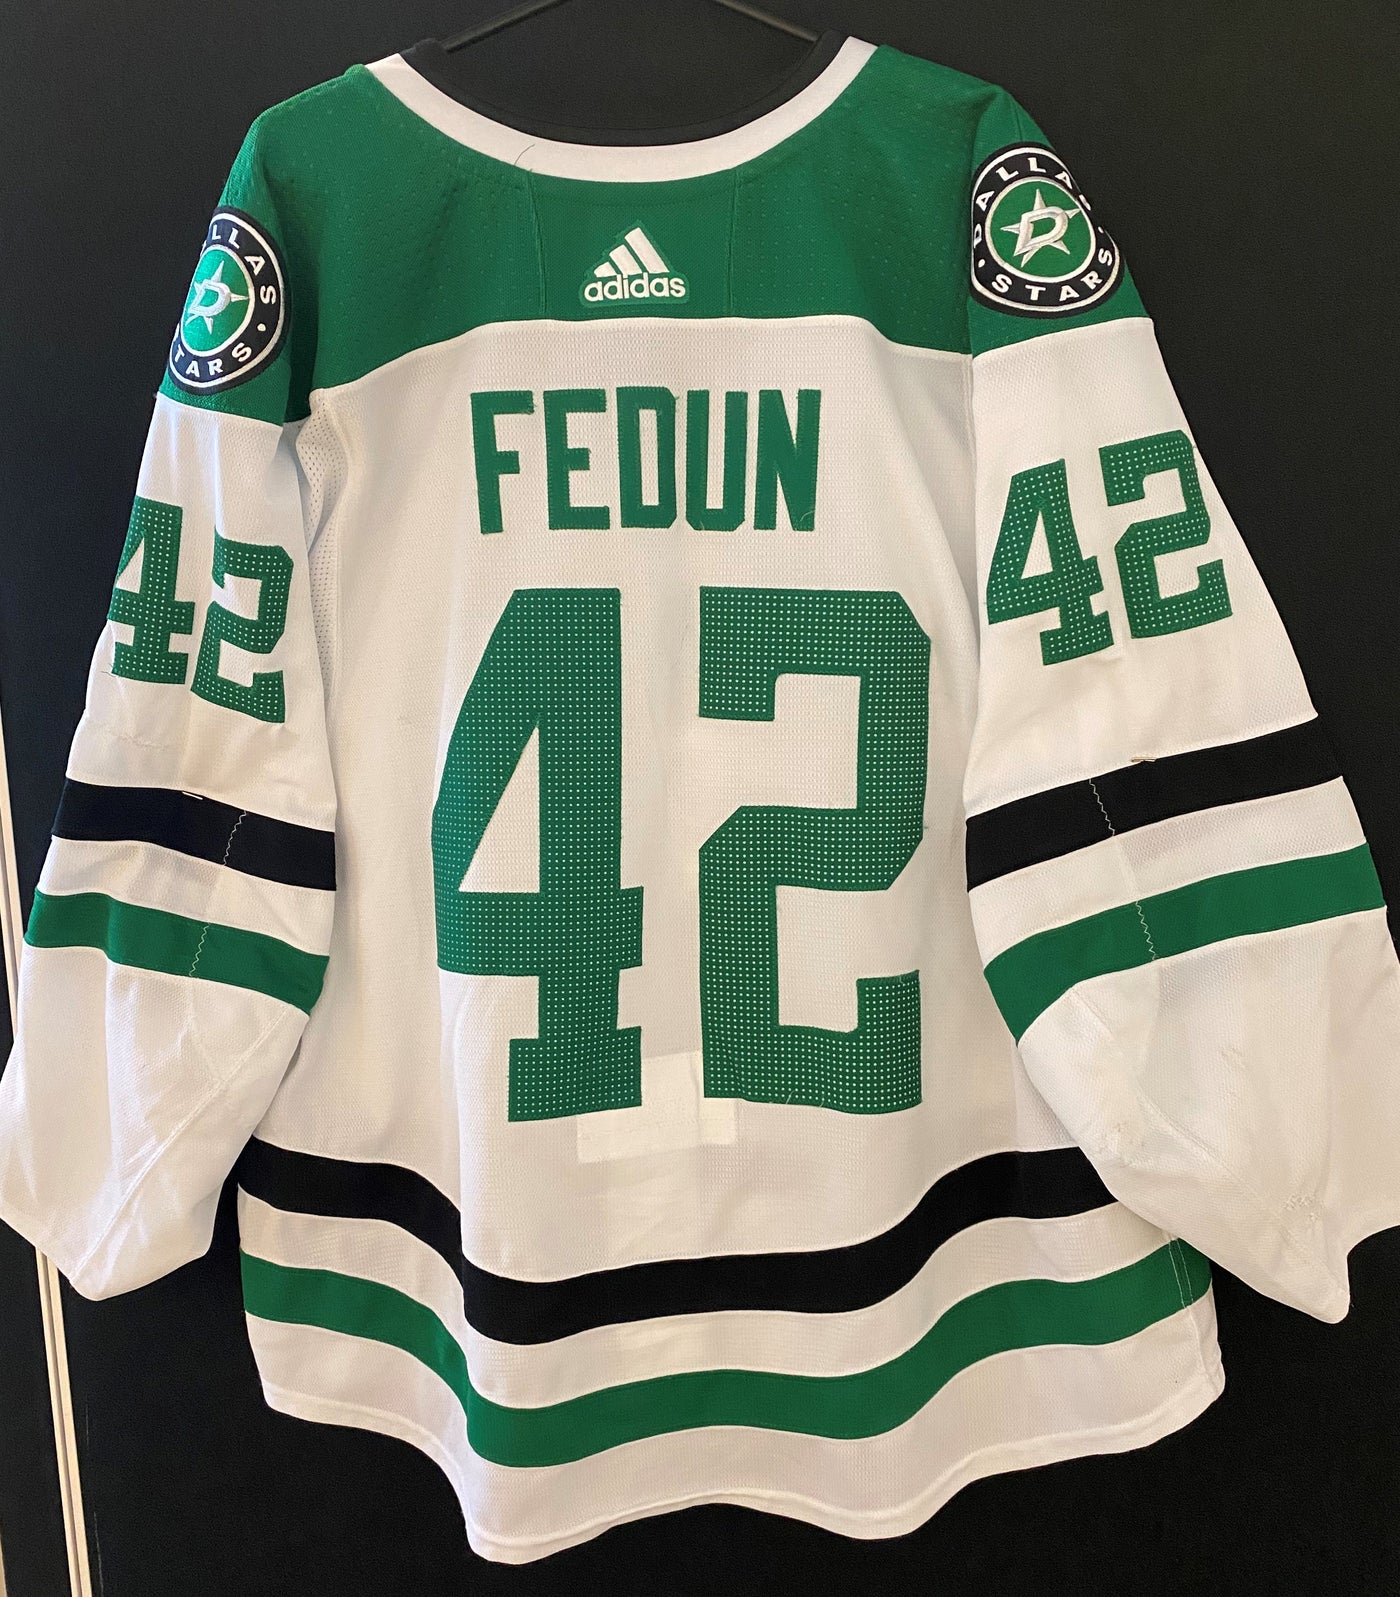 Taylor Fedun 19/20 Game Worn Away Jersey Set 1 in Green and White - Back View